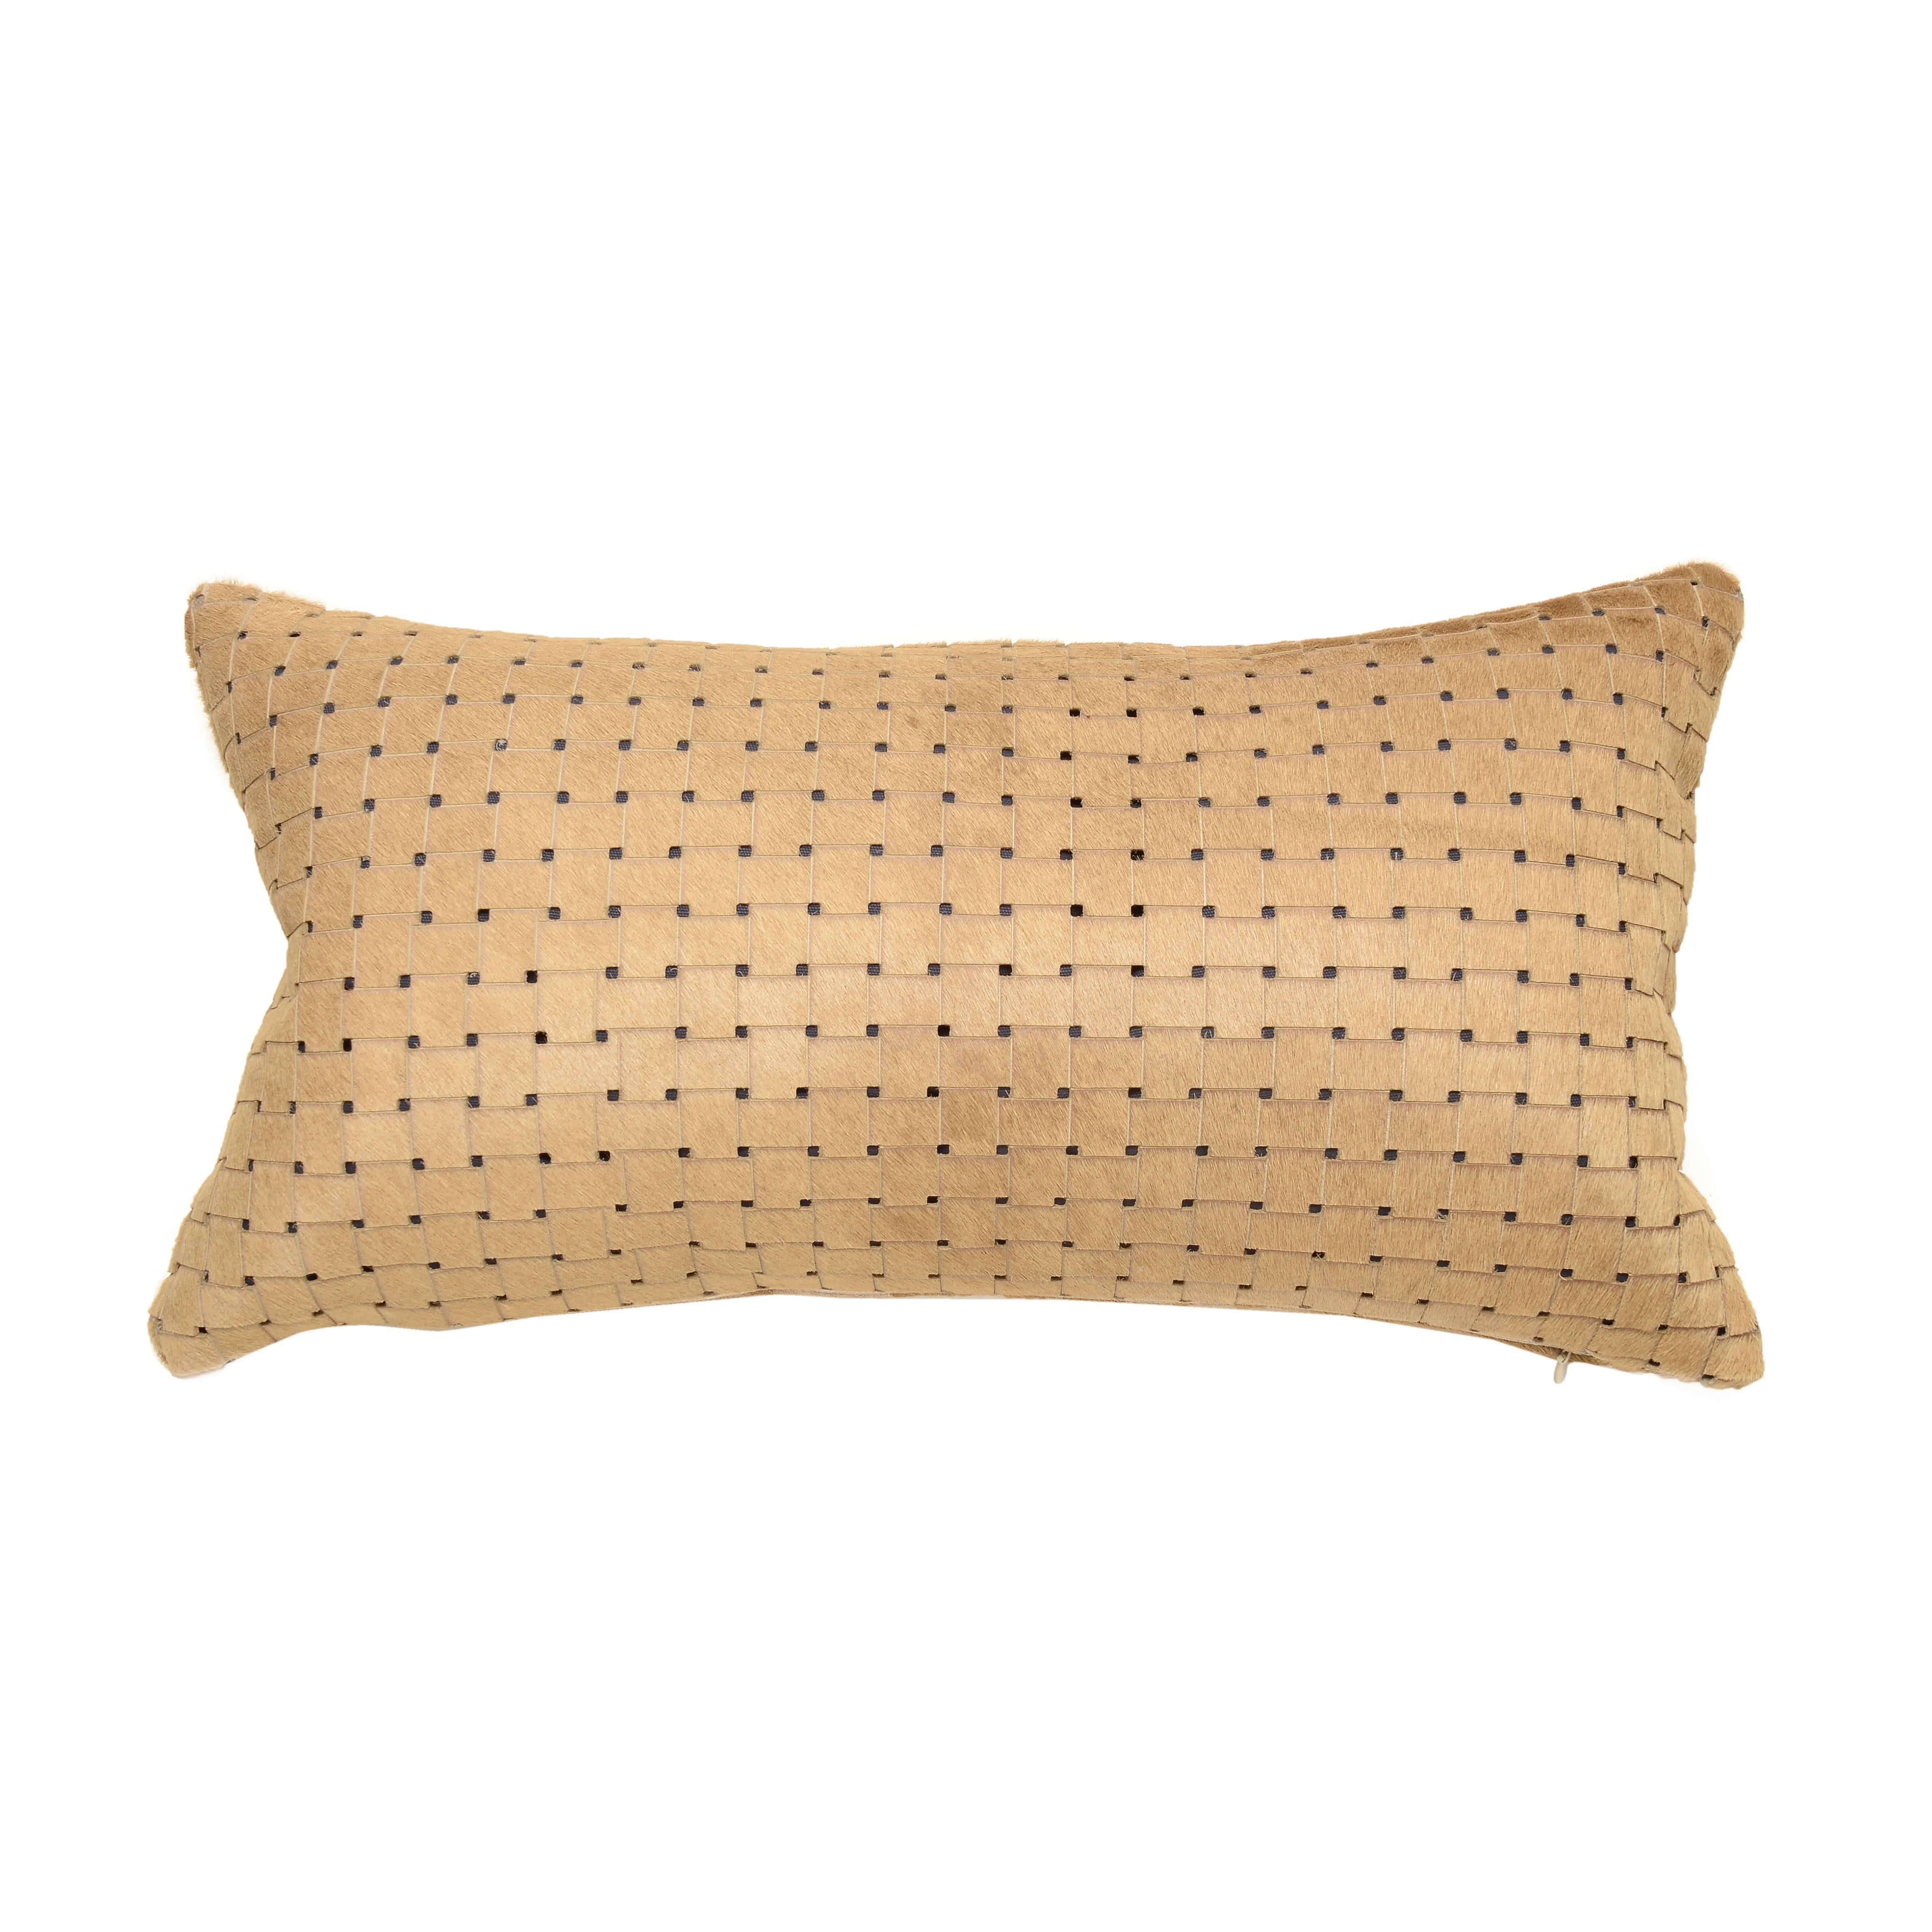 Beige/tan laser cut cowhide hair lumbar pillows.
Luxurious high sheen cowhide from Normandy France.
Beige/Tan hair on hide with gray lining visible through sure laser cuts. 
Basket weave laser cut pattern.
Measures: 12